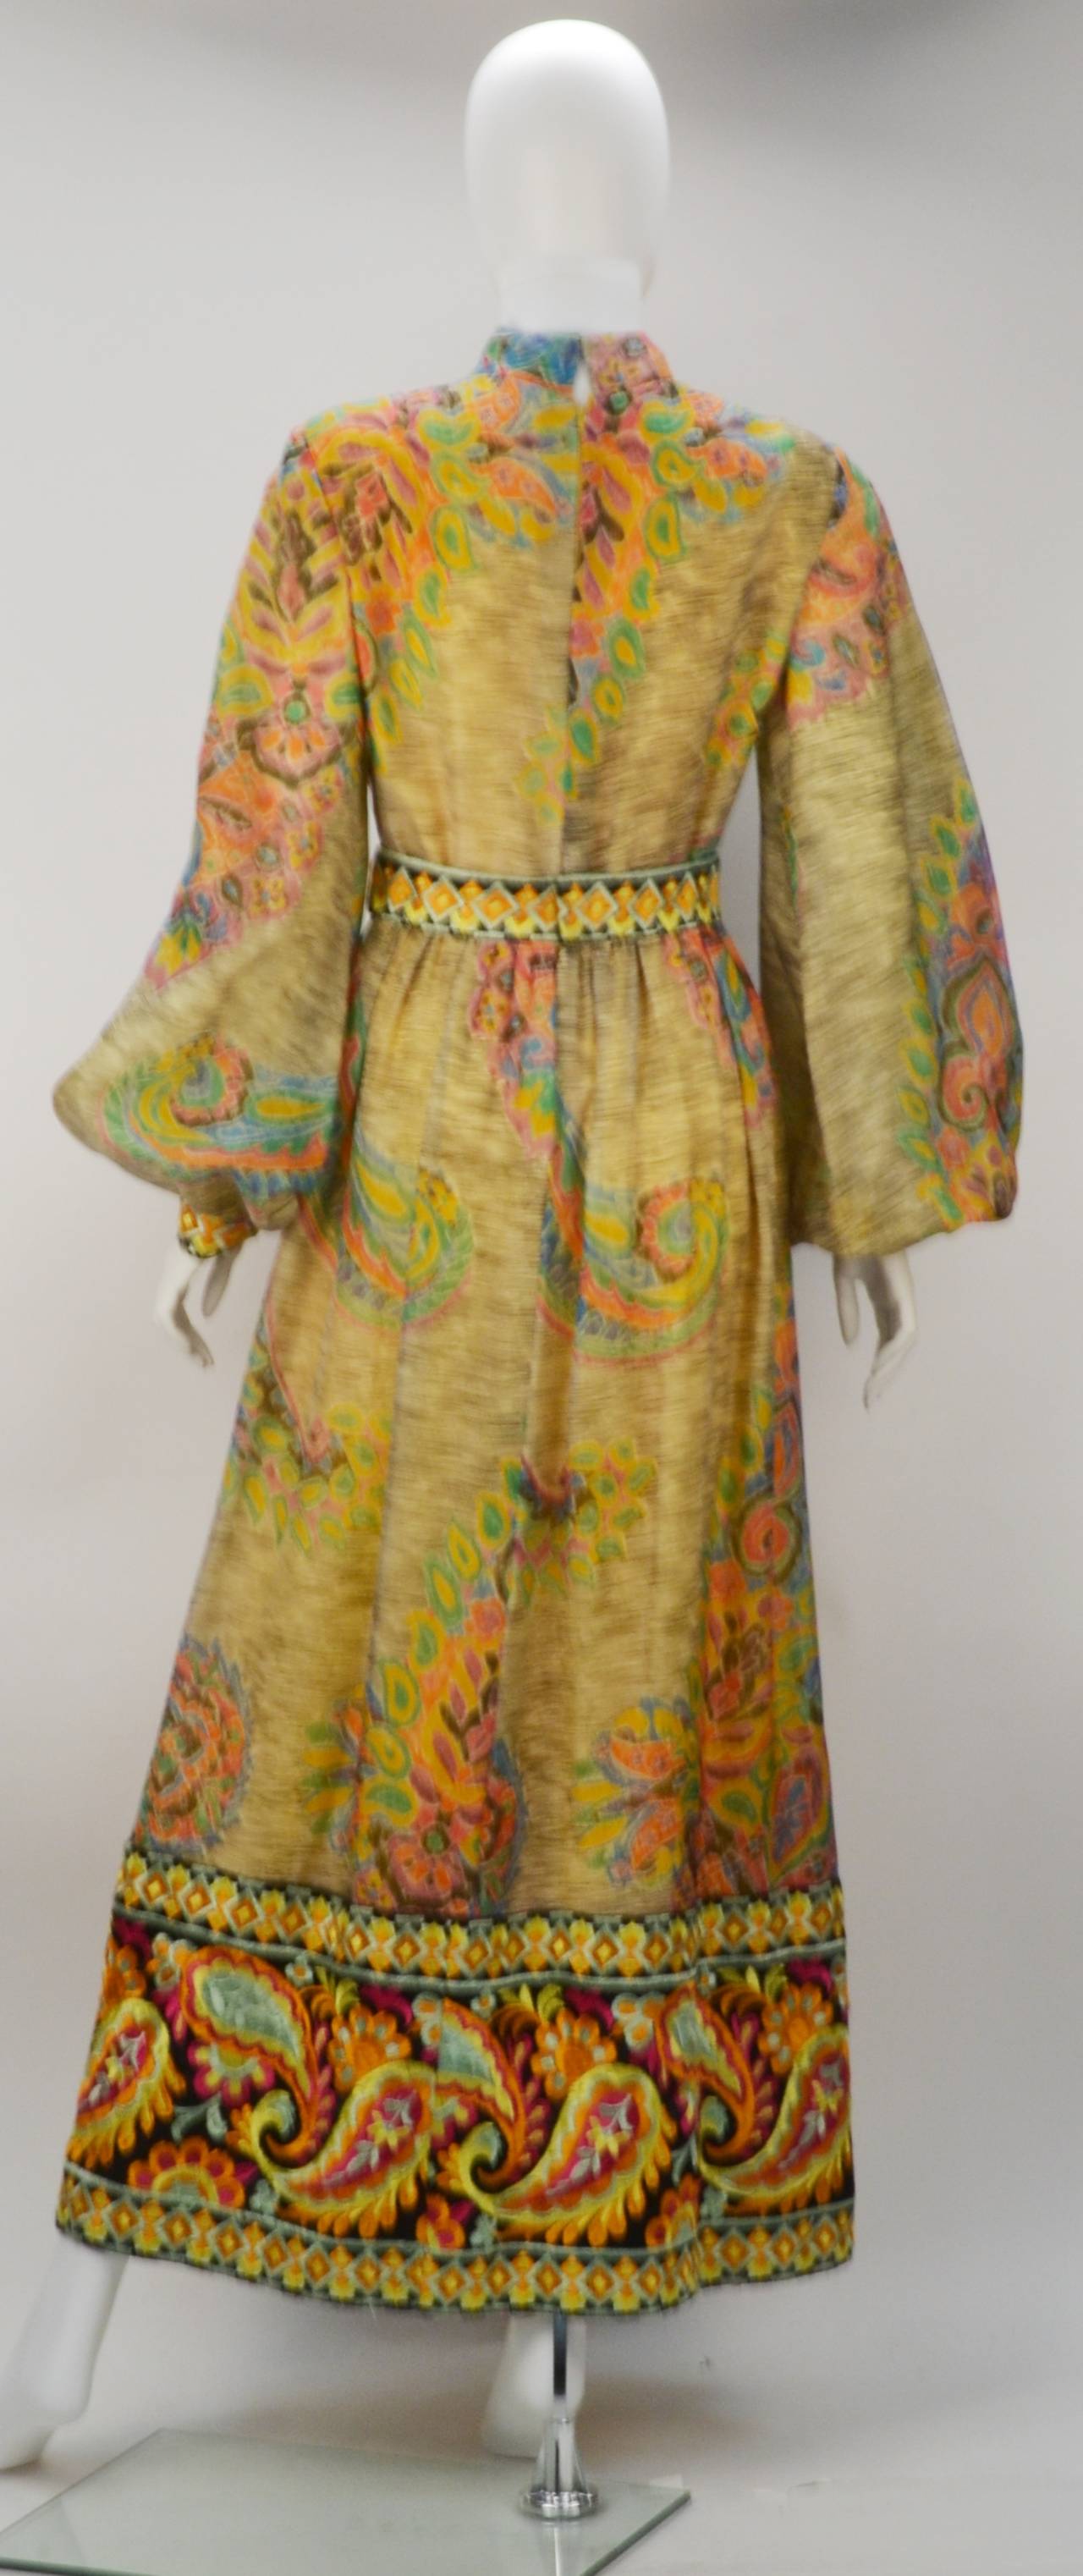 Embrace your whimsy and your accomplished sense of style by wearing this stunning yellow and multi-colored gown. Boho feel with the ornate embroidery in hues of gold and yellow. Its fully embroidered hem, high collar and bishop sleeves makes this